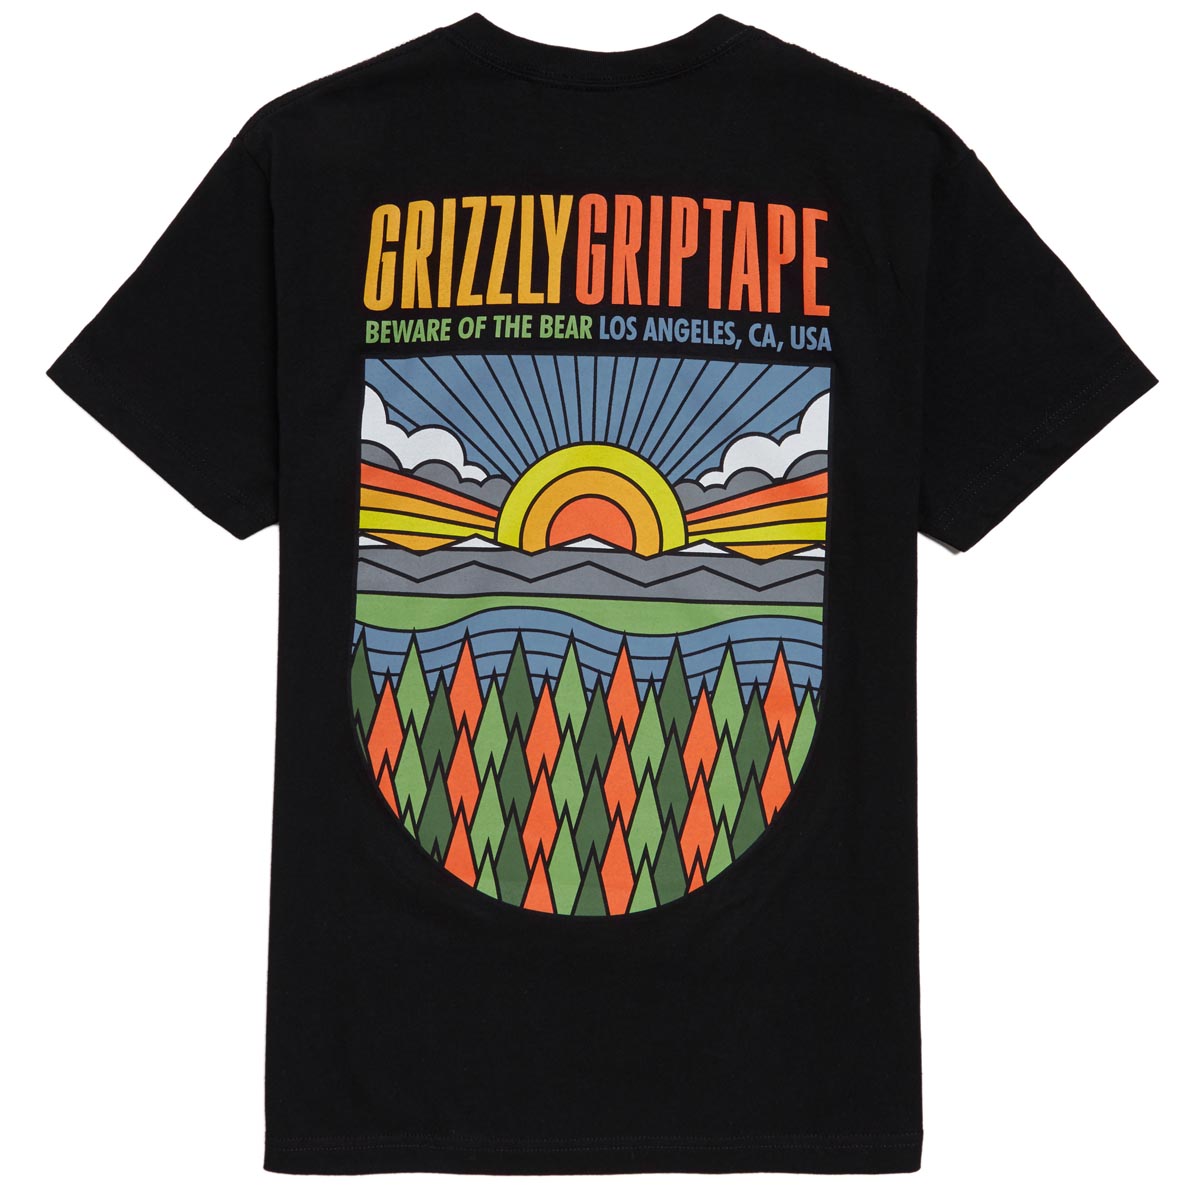 Grizzly Sun Valley T-Shirt - Black image 1